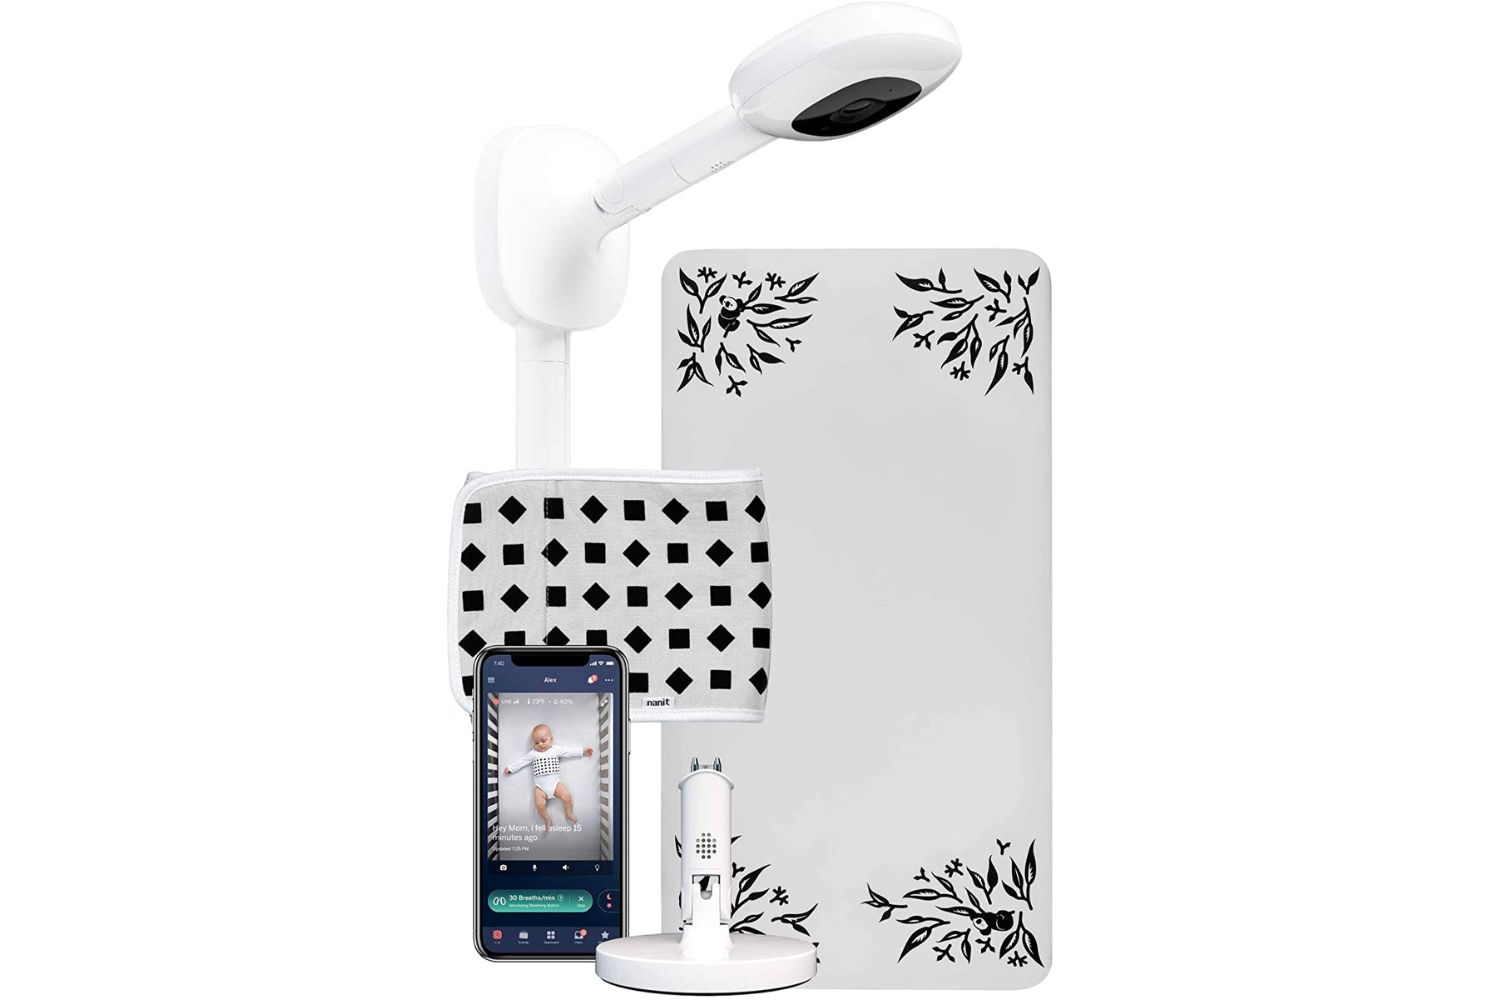 Deals Roundup Amazon 11/24: Nanit Pro Complete Baby Monitoring System